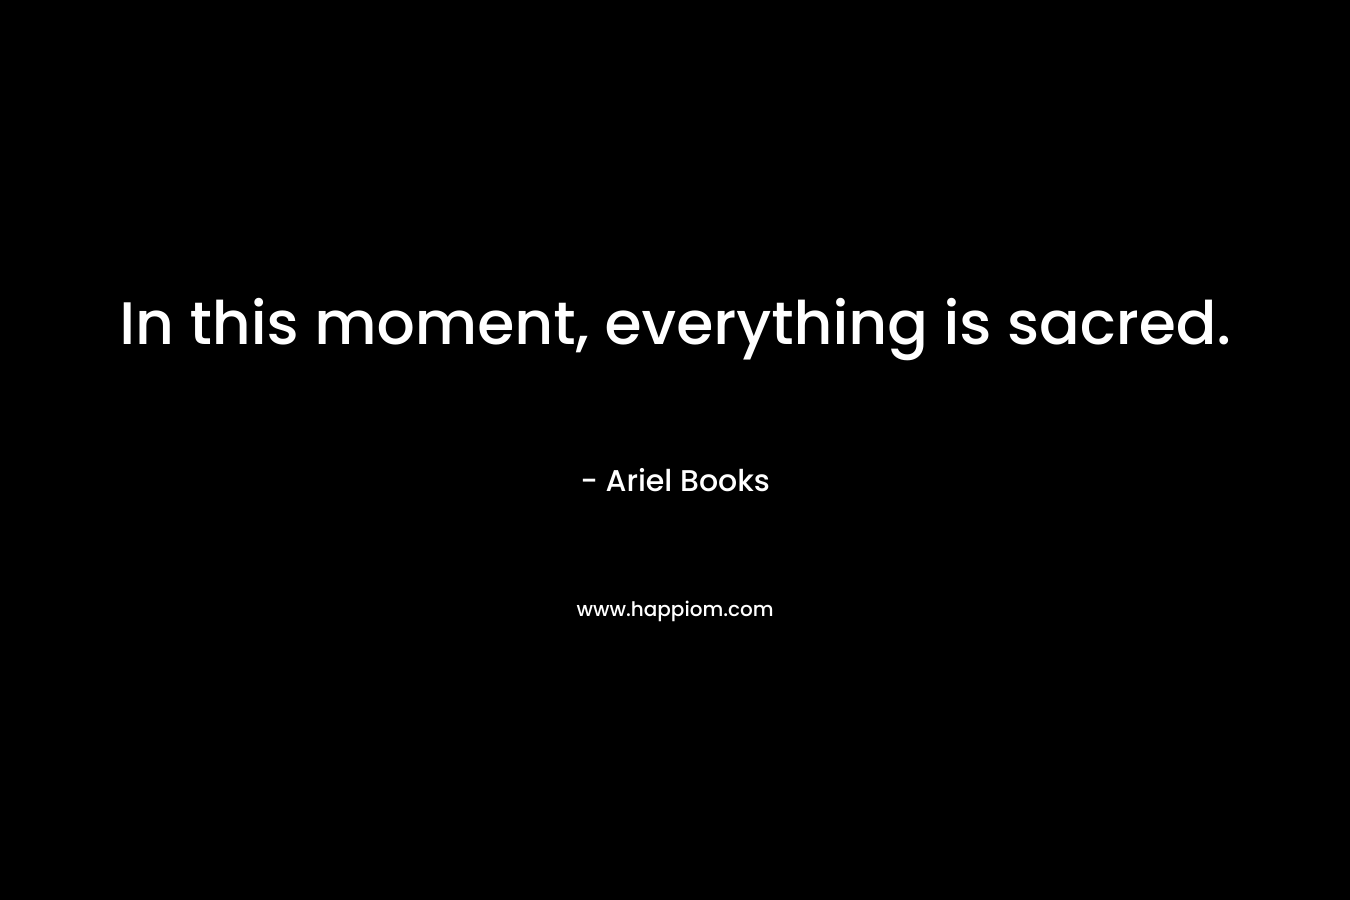 In this moment, everything is sacred. – Ariel Books